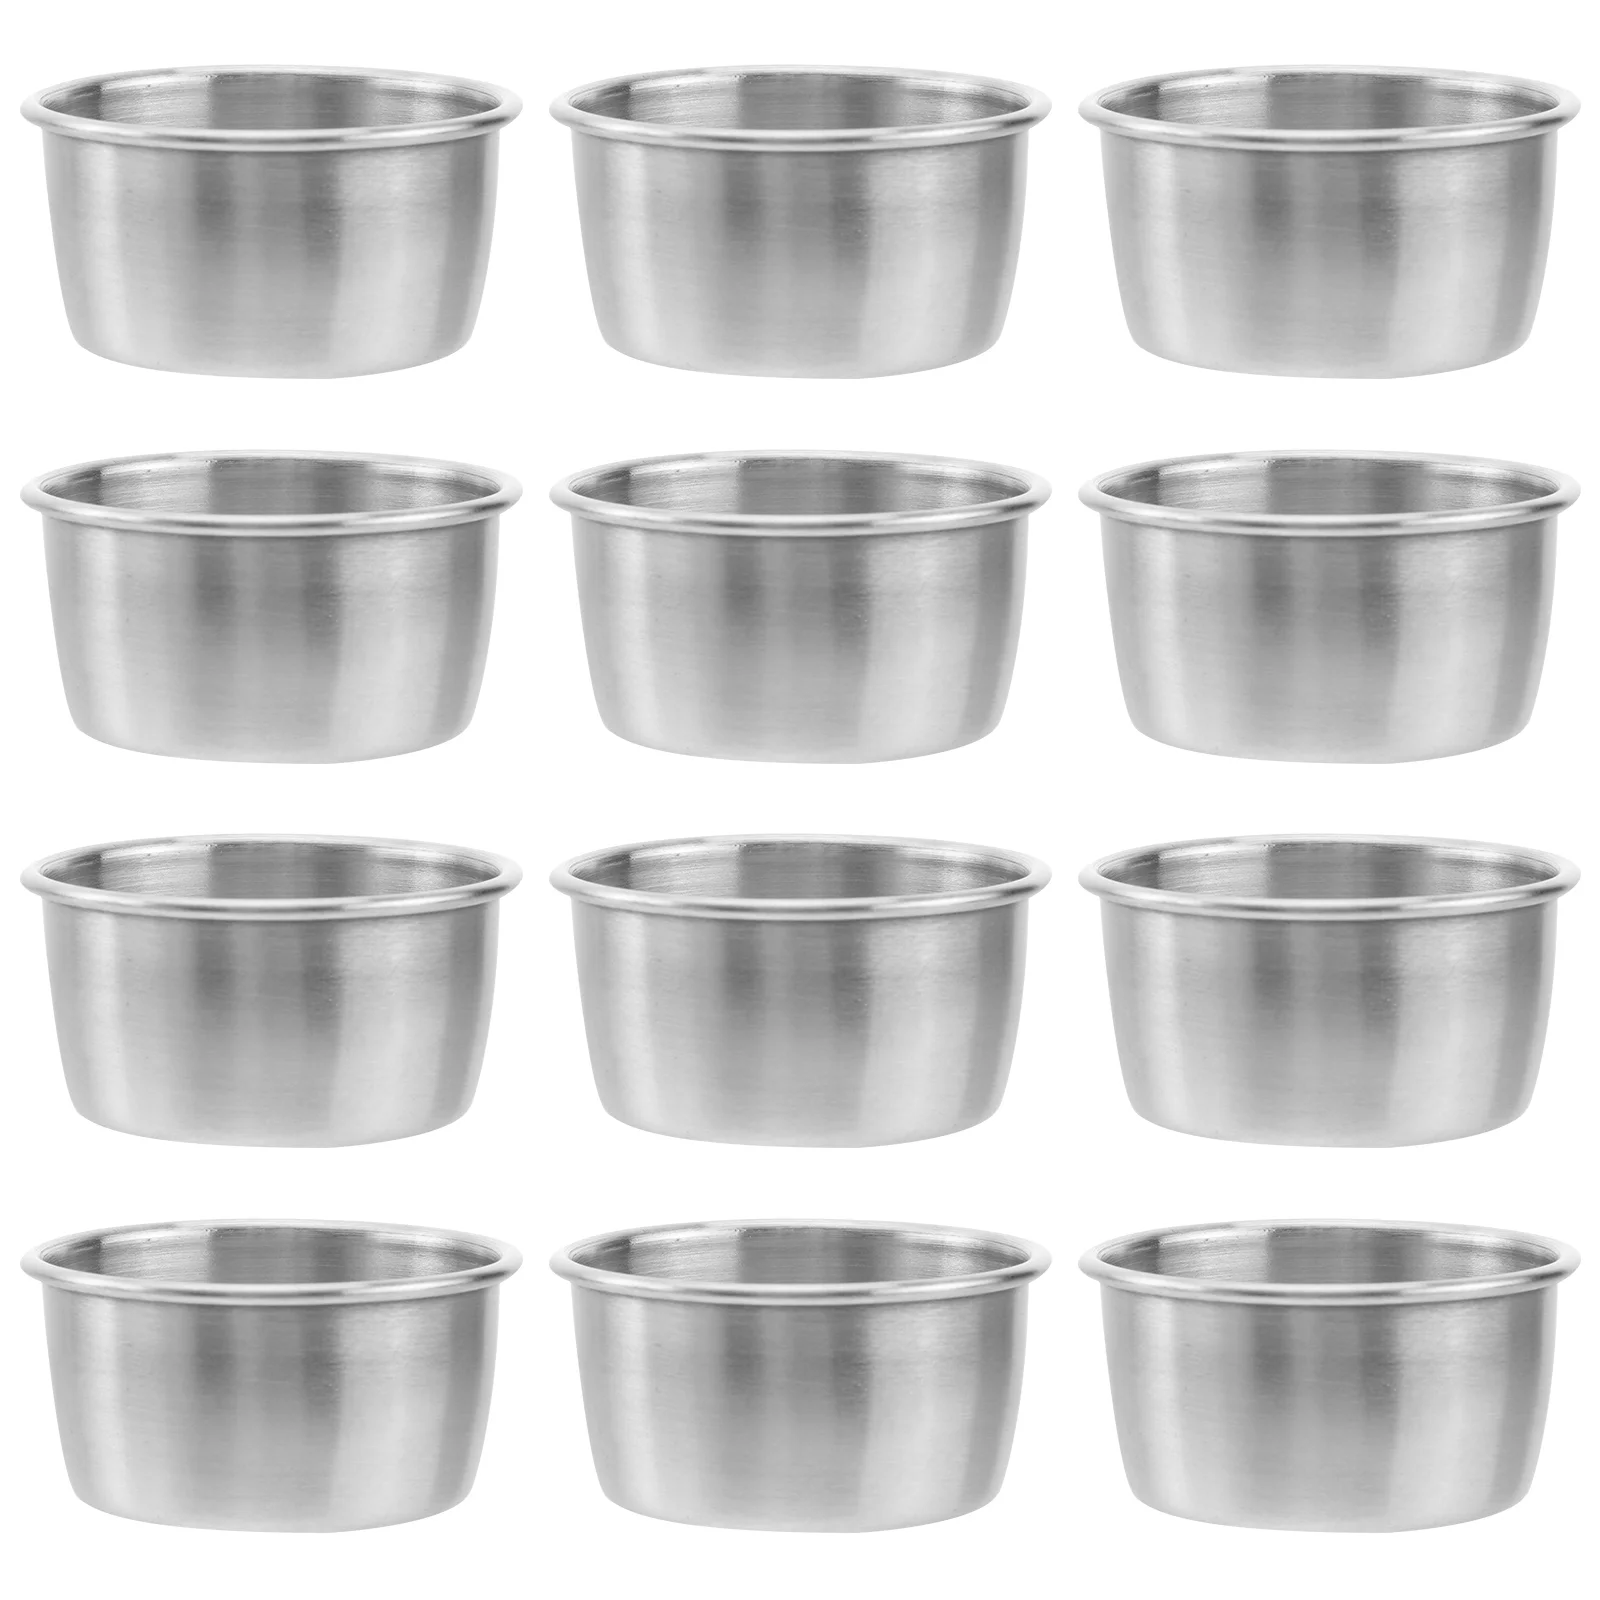 

Sauce Cups Dipping Bowls Condiment Stainless Steel Dish Container Bowl Cupdishes Minimetal Soy Ramekins Portion Appetizer